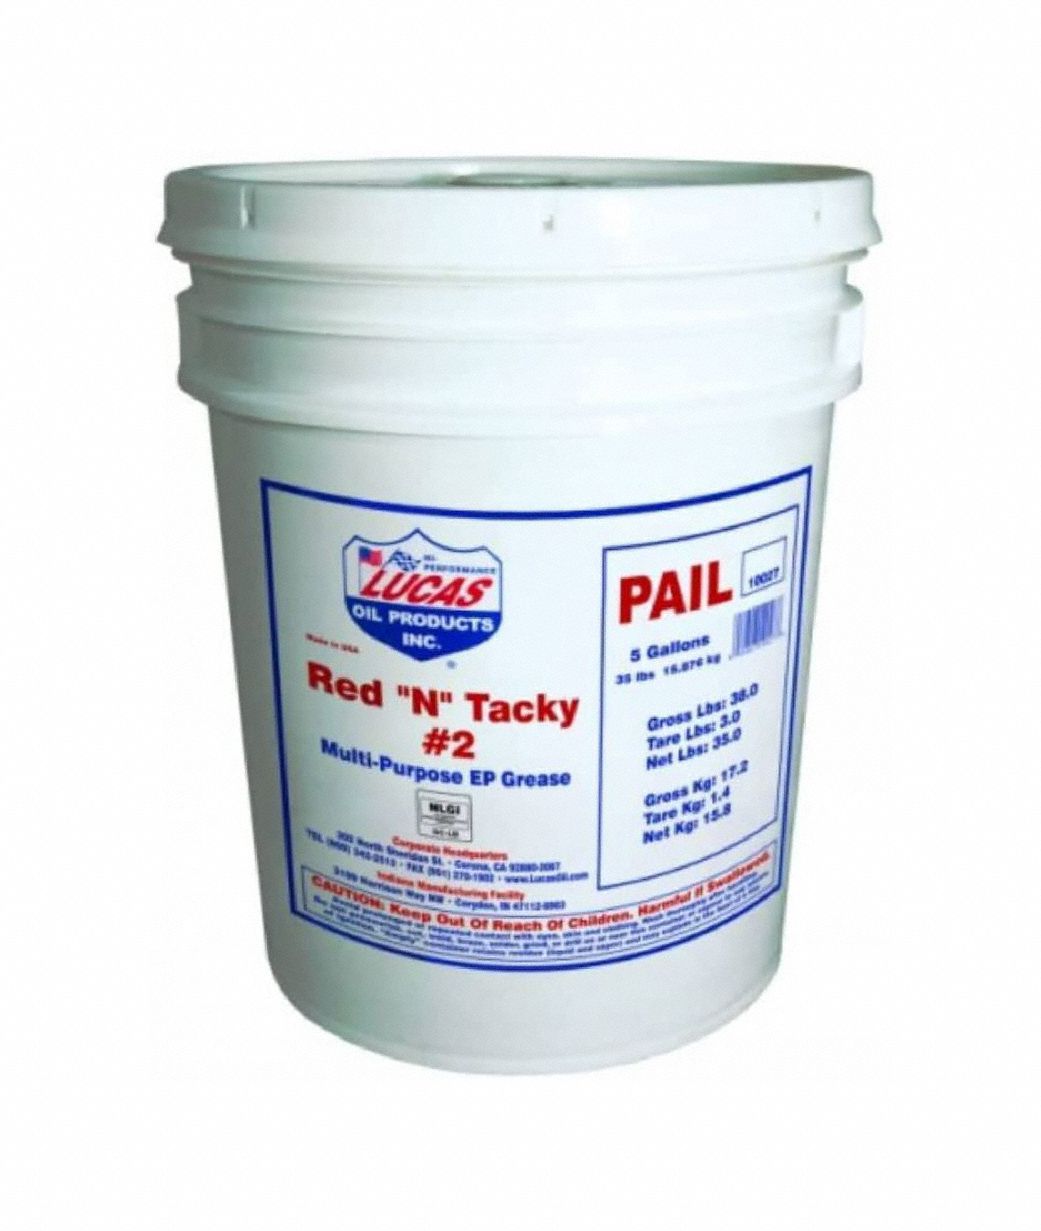 Lithium Grease, 35 lb, Pail, Red